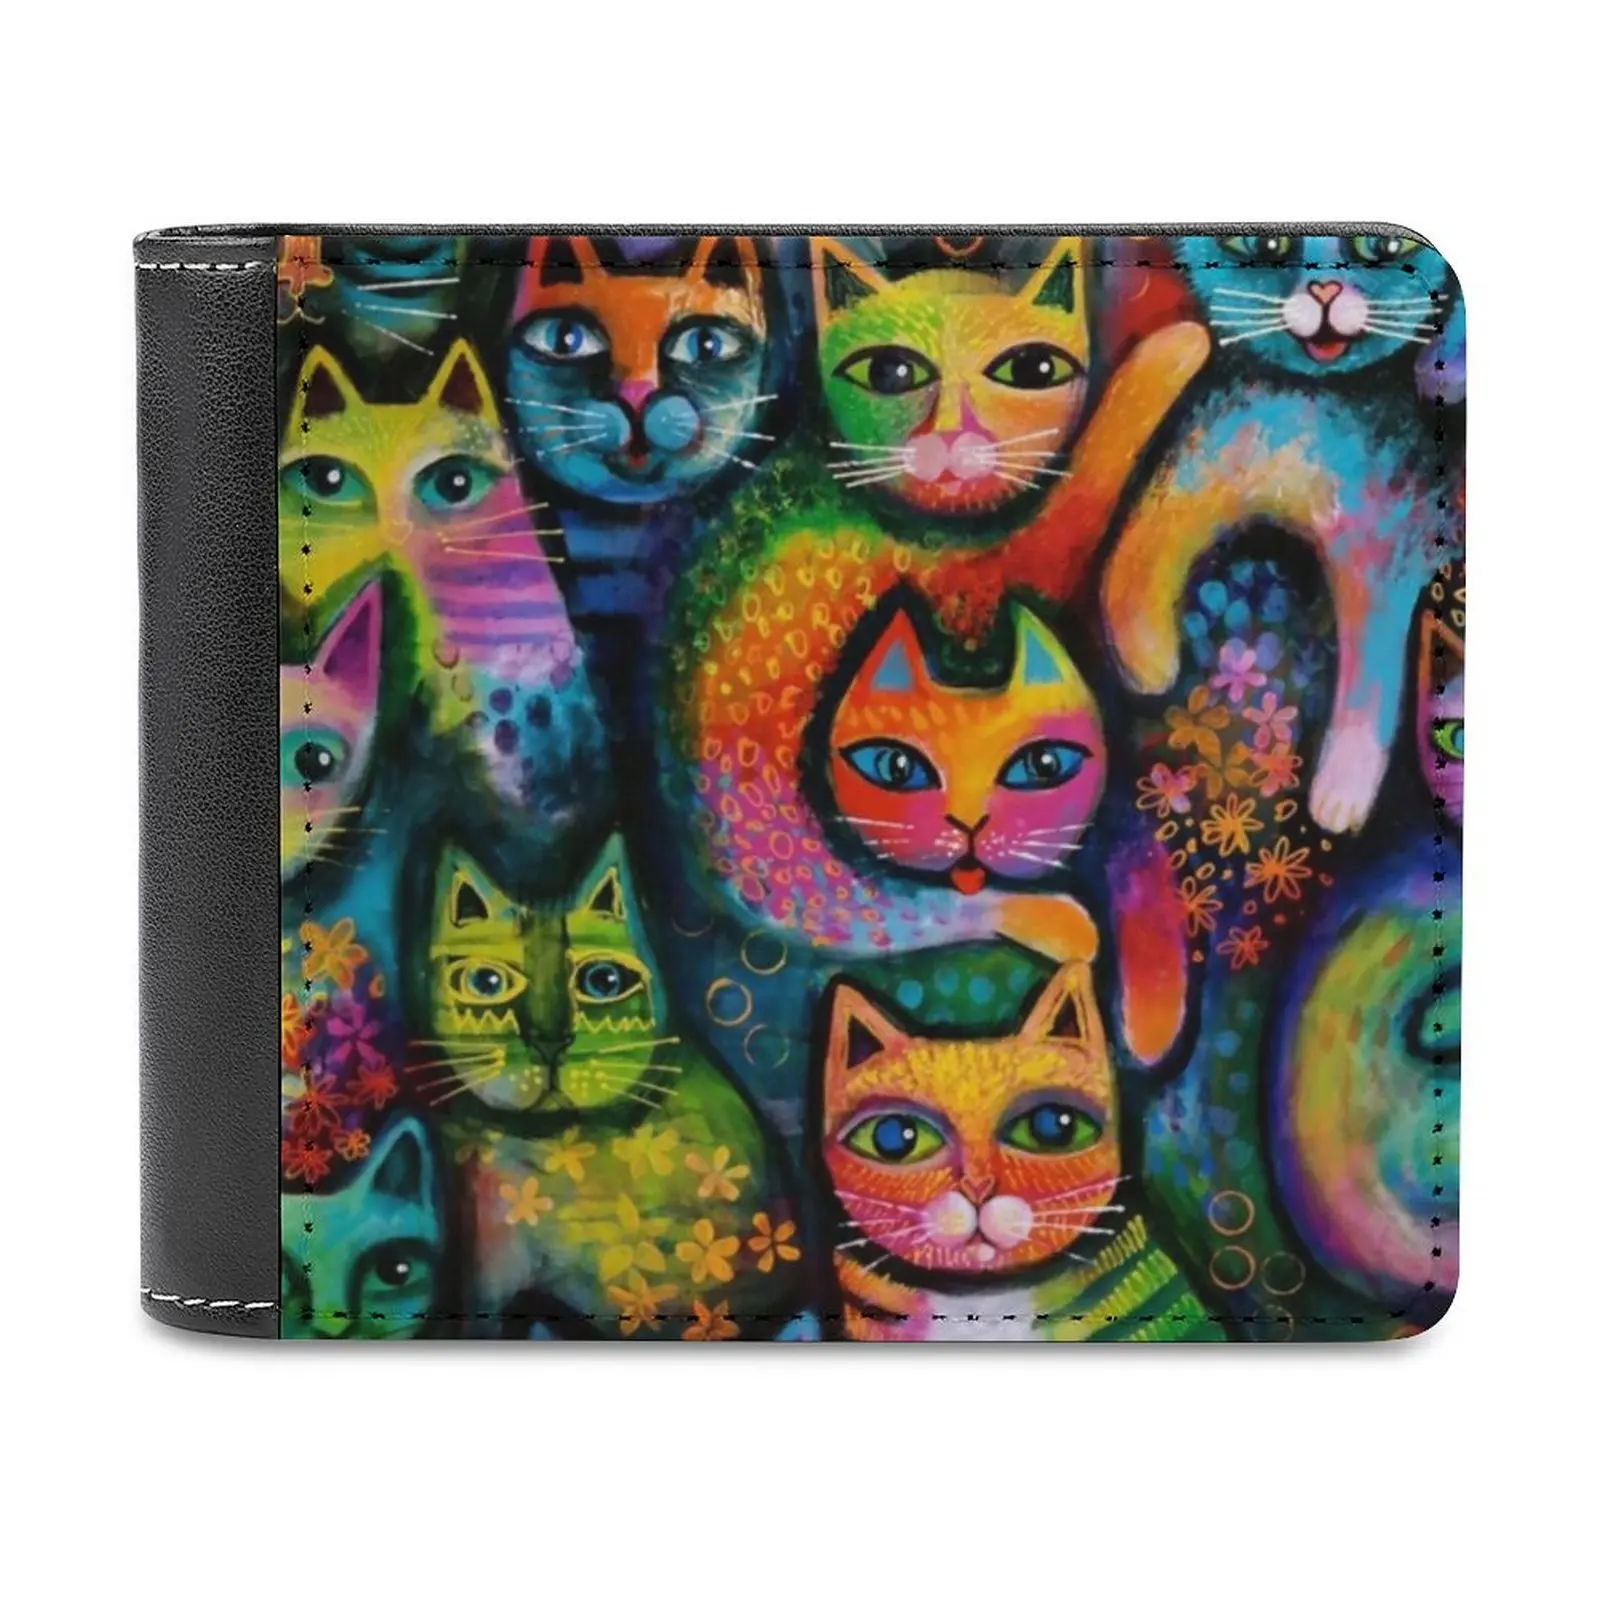 

Magicats 2 Men Wallet Pu Leather Short Male Purses Credit Card Wallet For Men Money Bag Cats Colourful Whimsical Fun Abstract